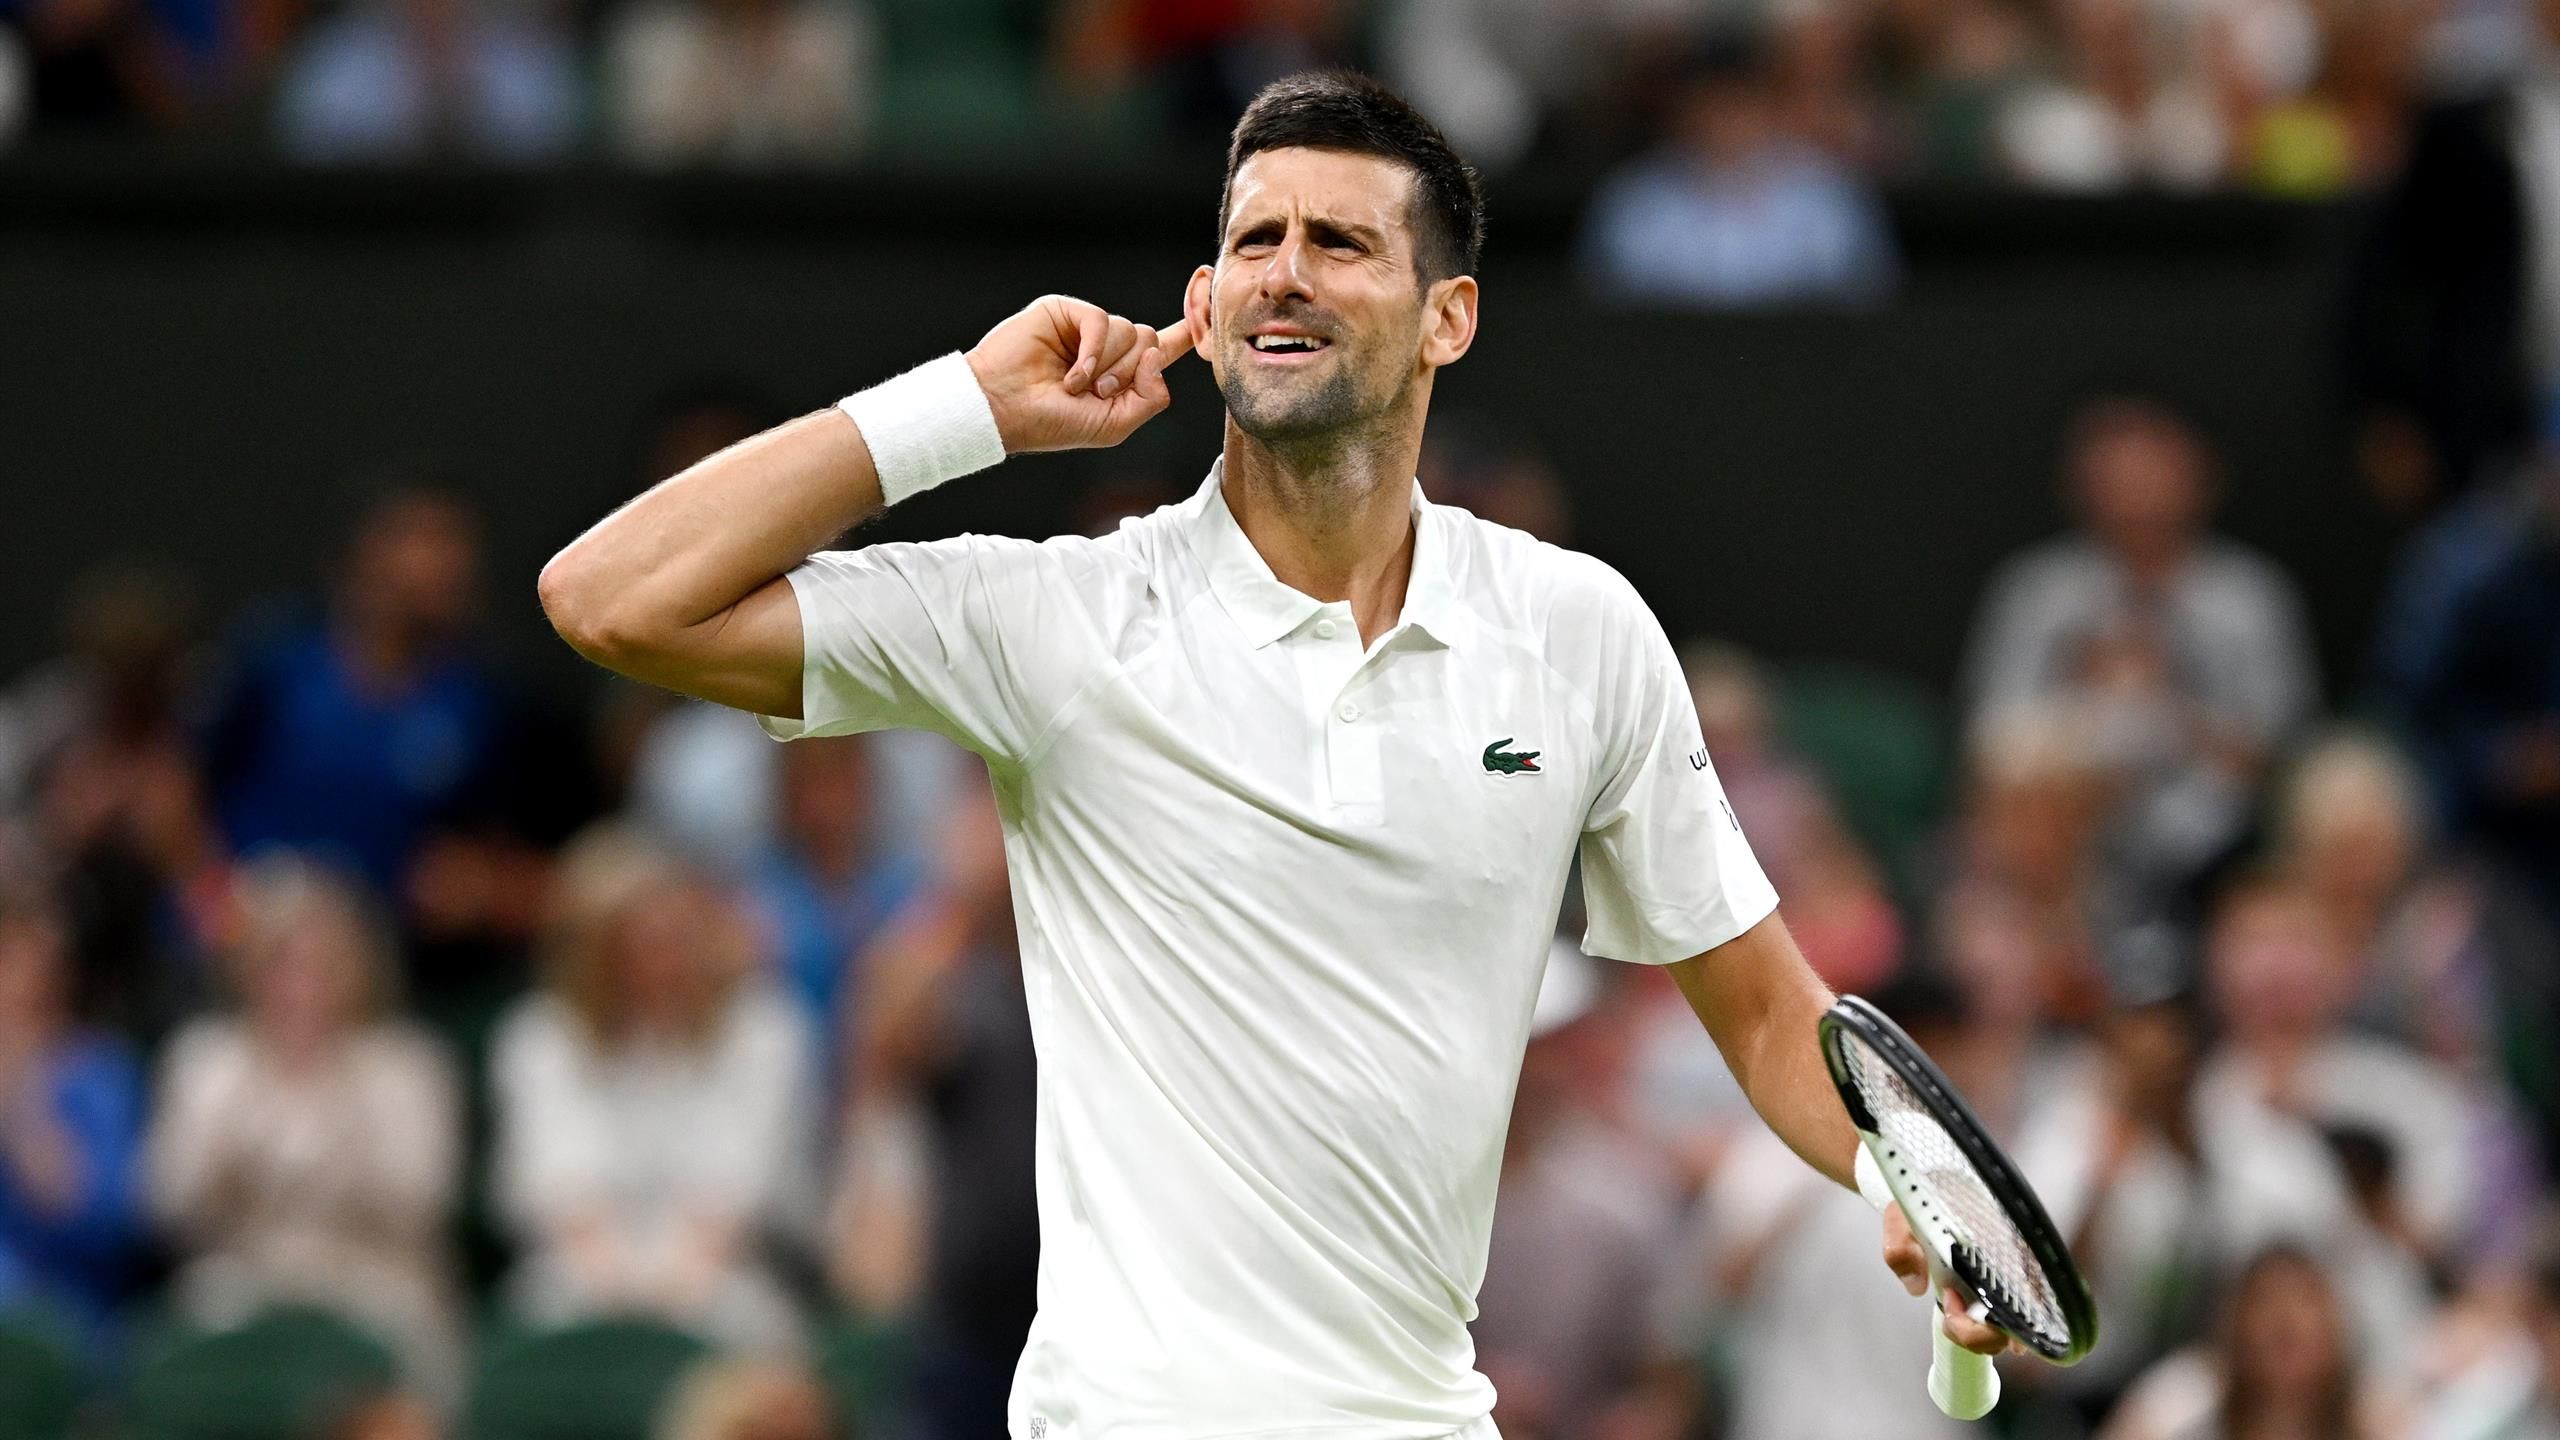 Wimbledon 2023 Day 7 Order of Play and schedule